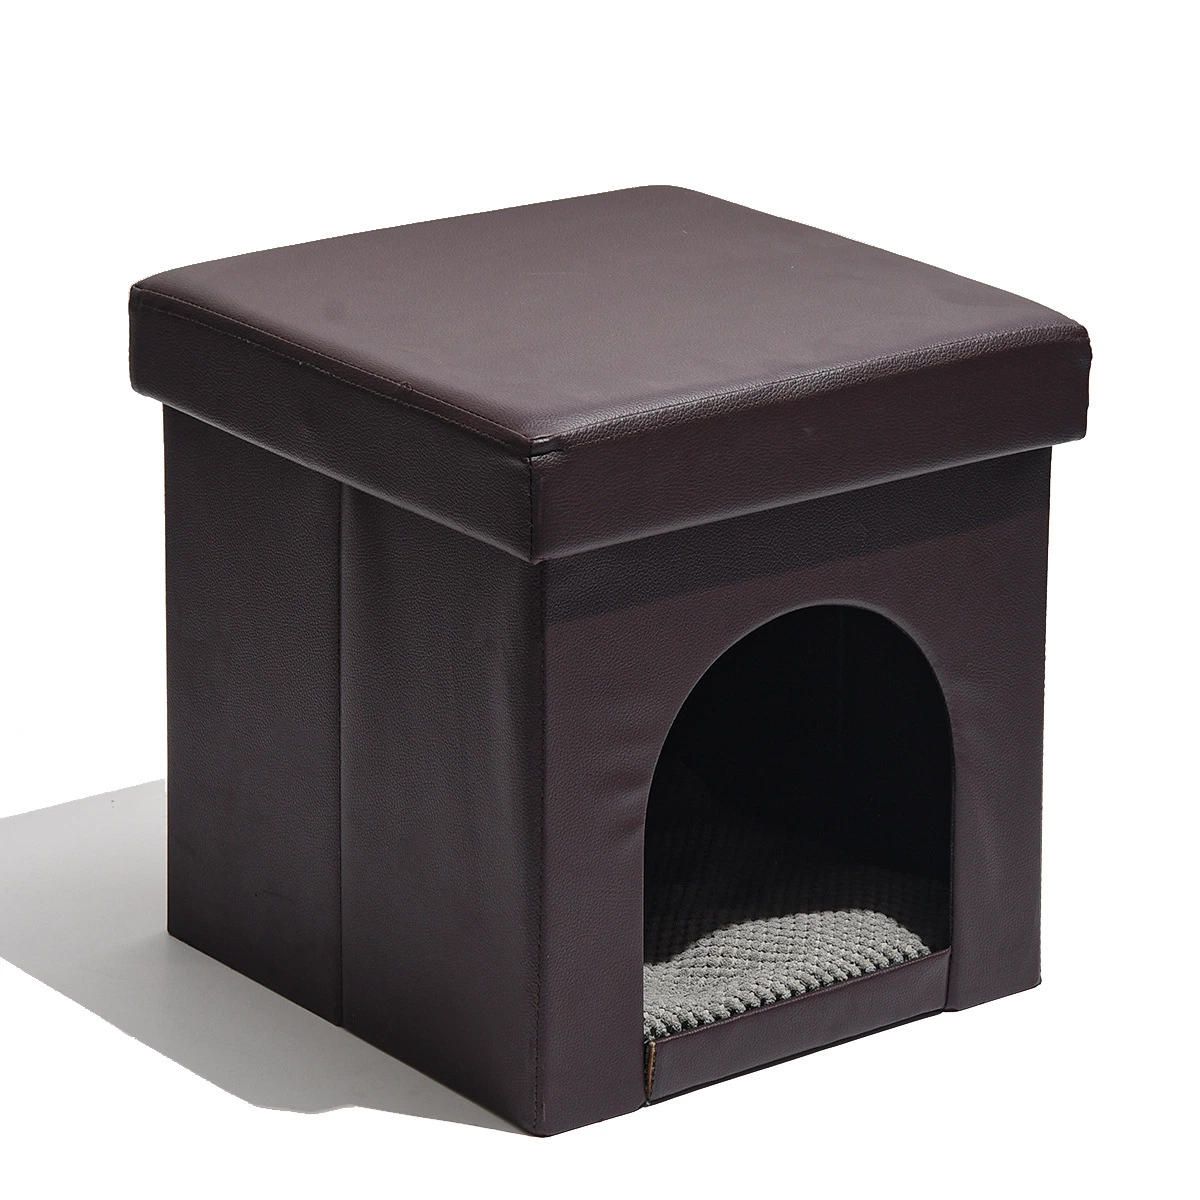 Factory Direct Square Cat Litter Stool Human and Cat Shared Fully Enclosed Four Seasons Universal Pet Litter Wooden Pet Stool